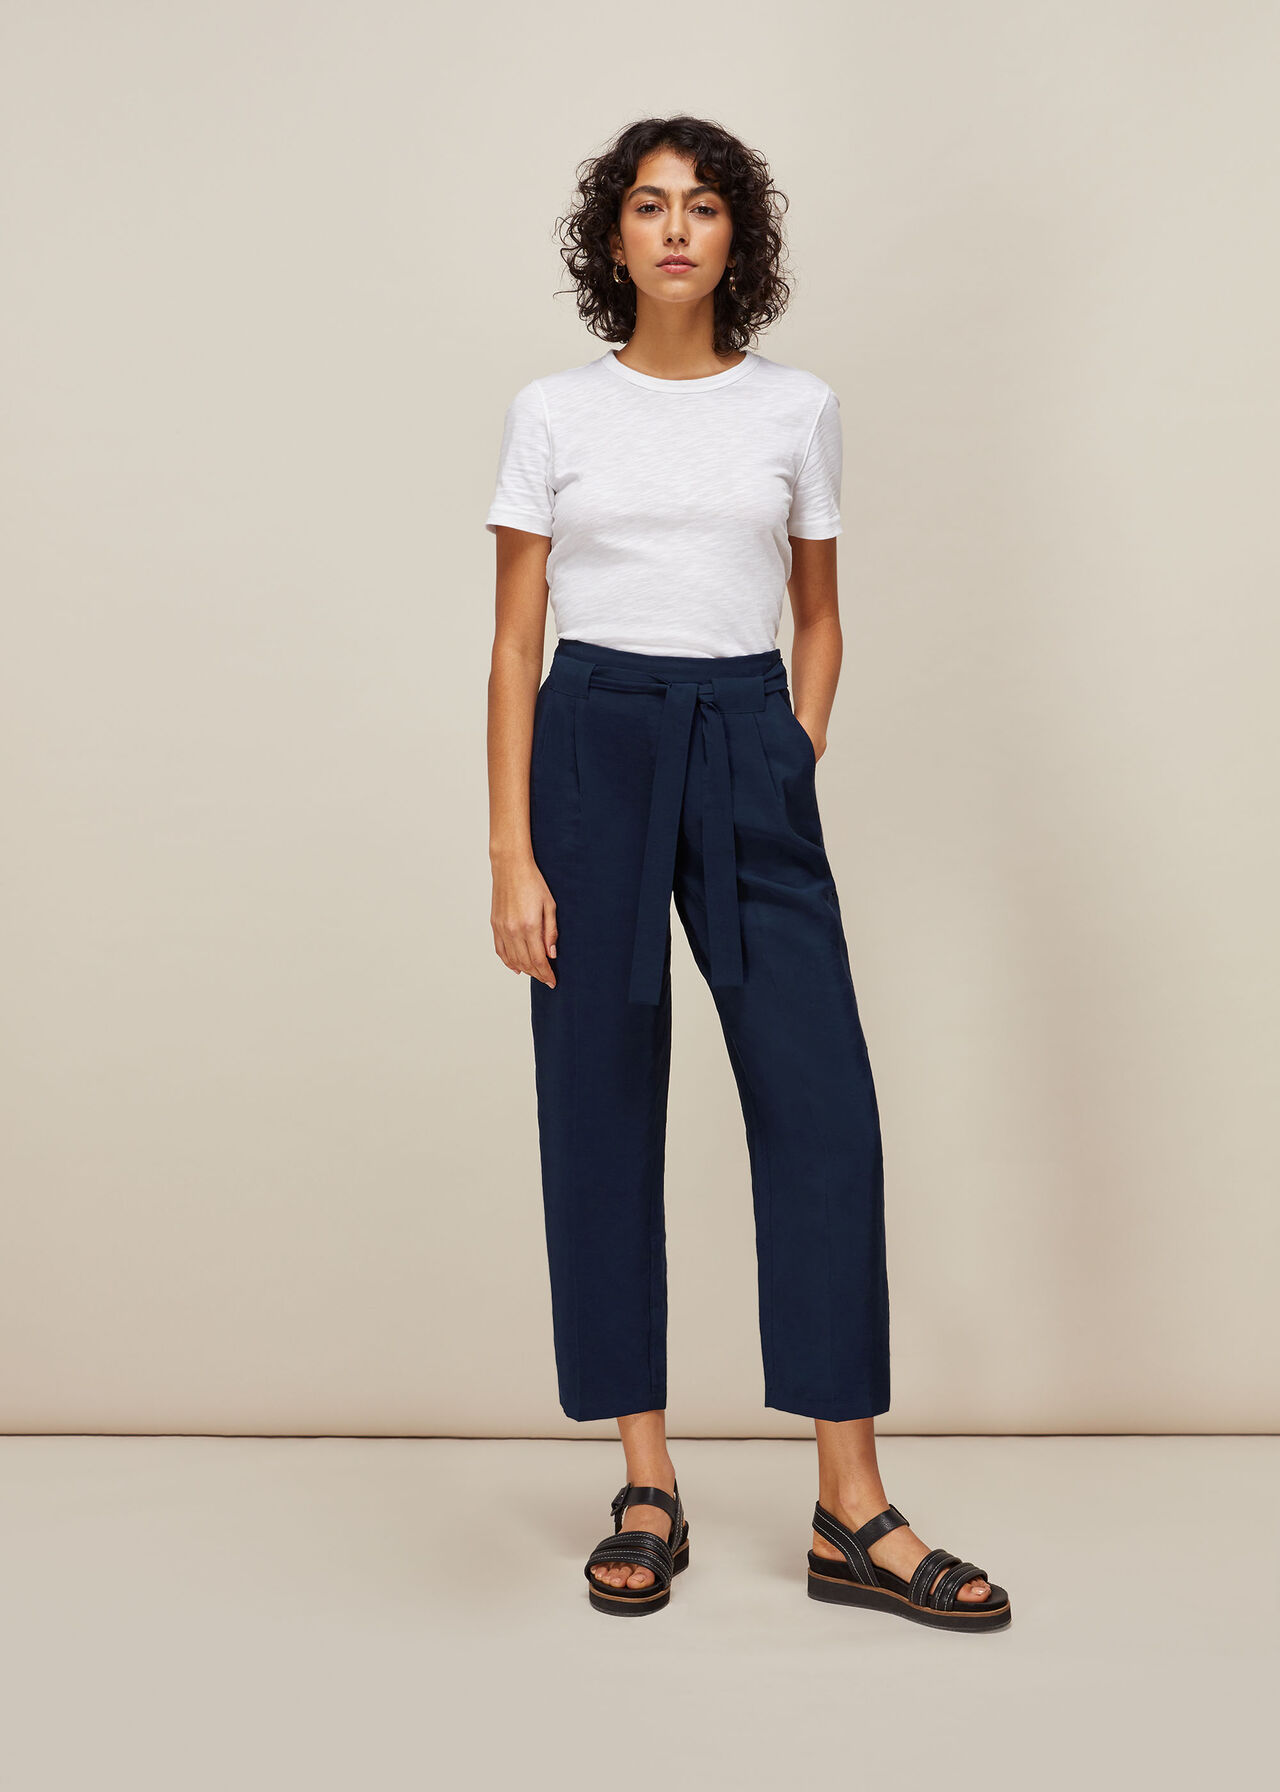 Navy Belted Casual Crop Trouser, WHISTLES